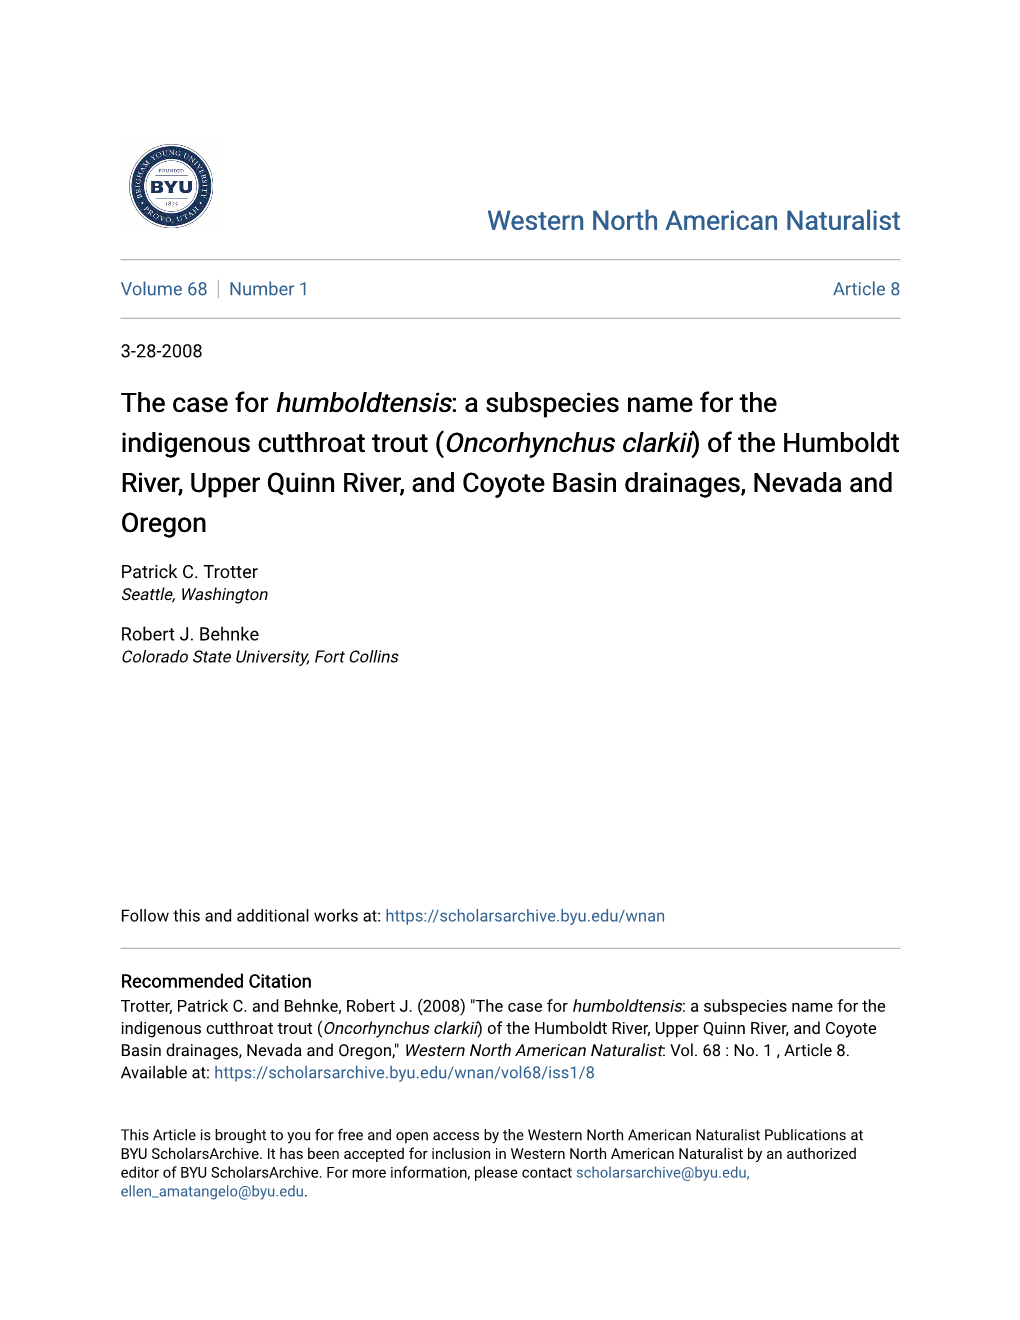 A Subspecies Name for the Indigenous Cutthroat Trout (Oncorhynchus Clarkii) of the Humboldt River, Upper Quinn River, and Coyote Basin Drainages, Nevada and Oregon